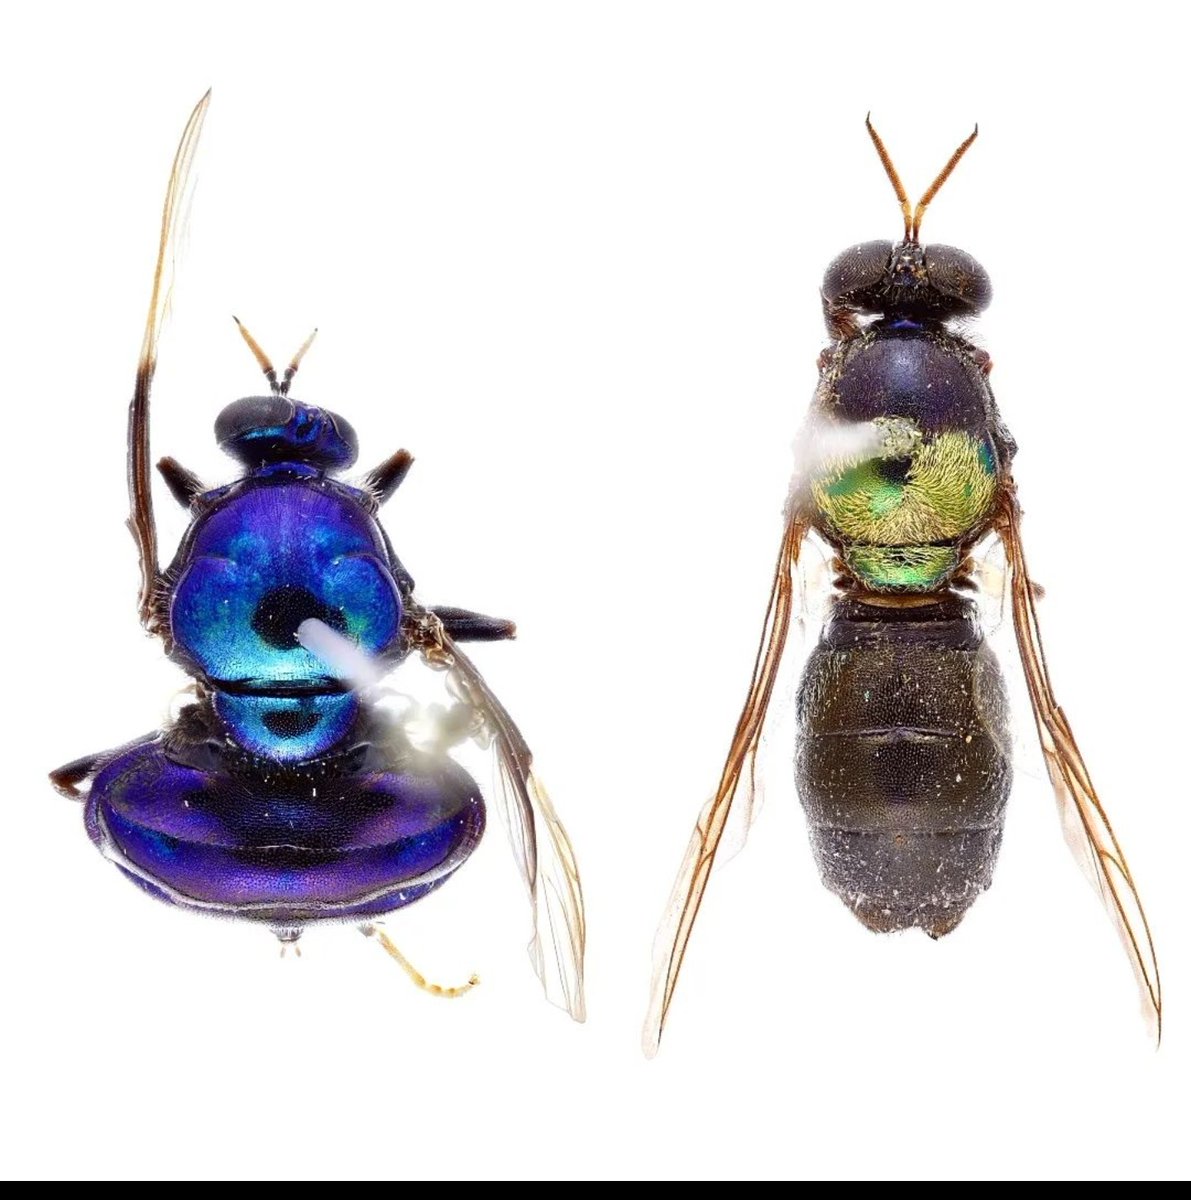 Please think of the less cute and cuddly (🐨😮‍💨) animals that need our protection this Threatened Species Day, like these endangered soldier flies Opaluma opulens (L) & Antissella purprasina (R) 🪰🔥 #ozinverts #ThreatenedSpeciesDay2022